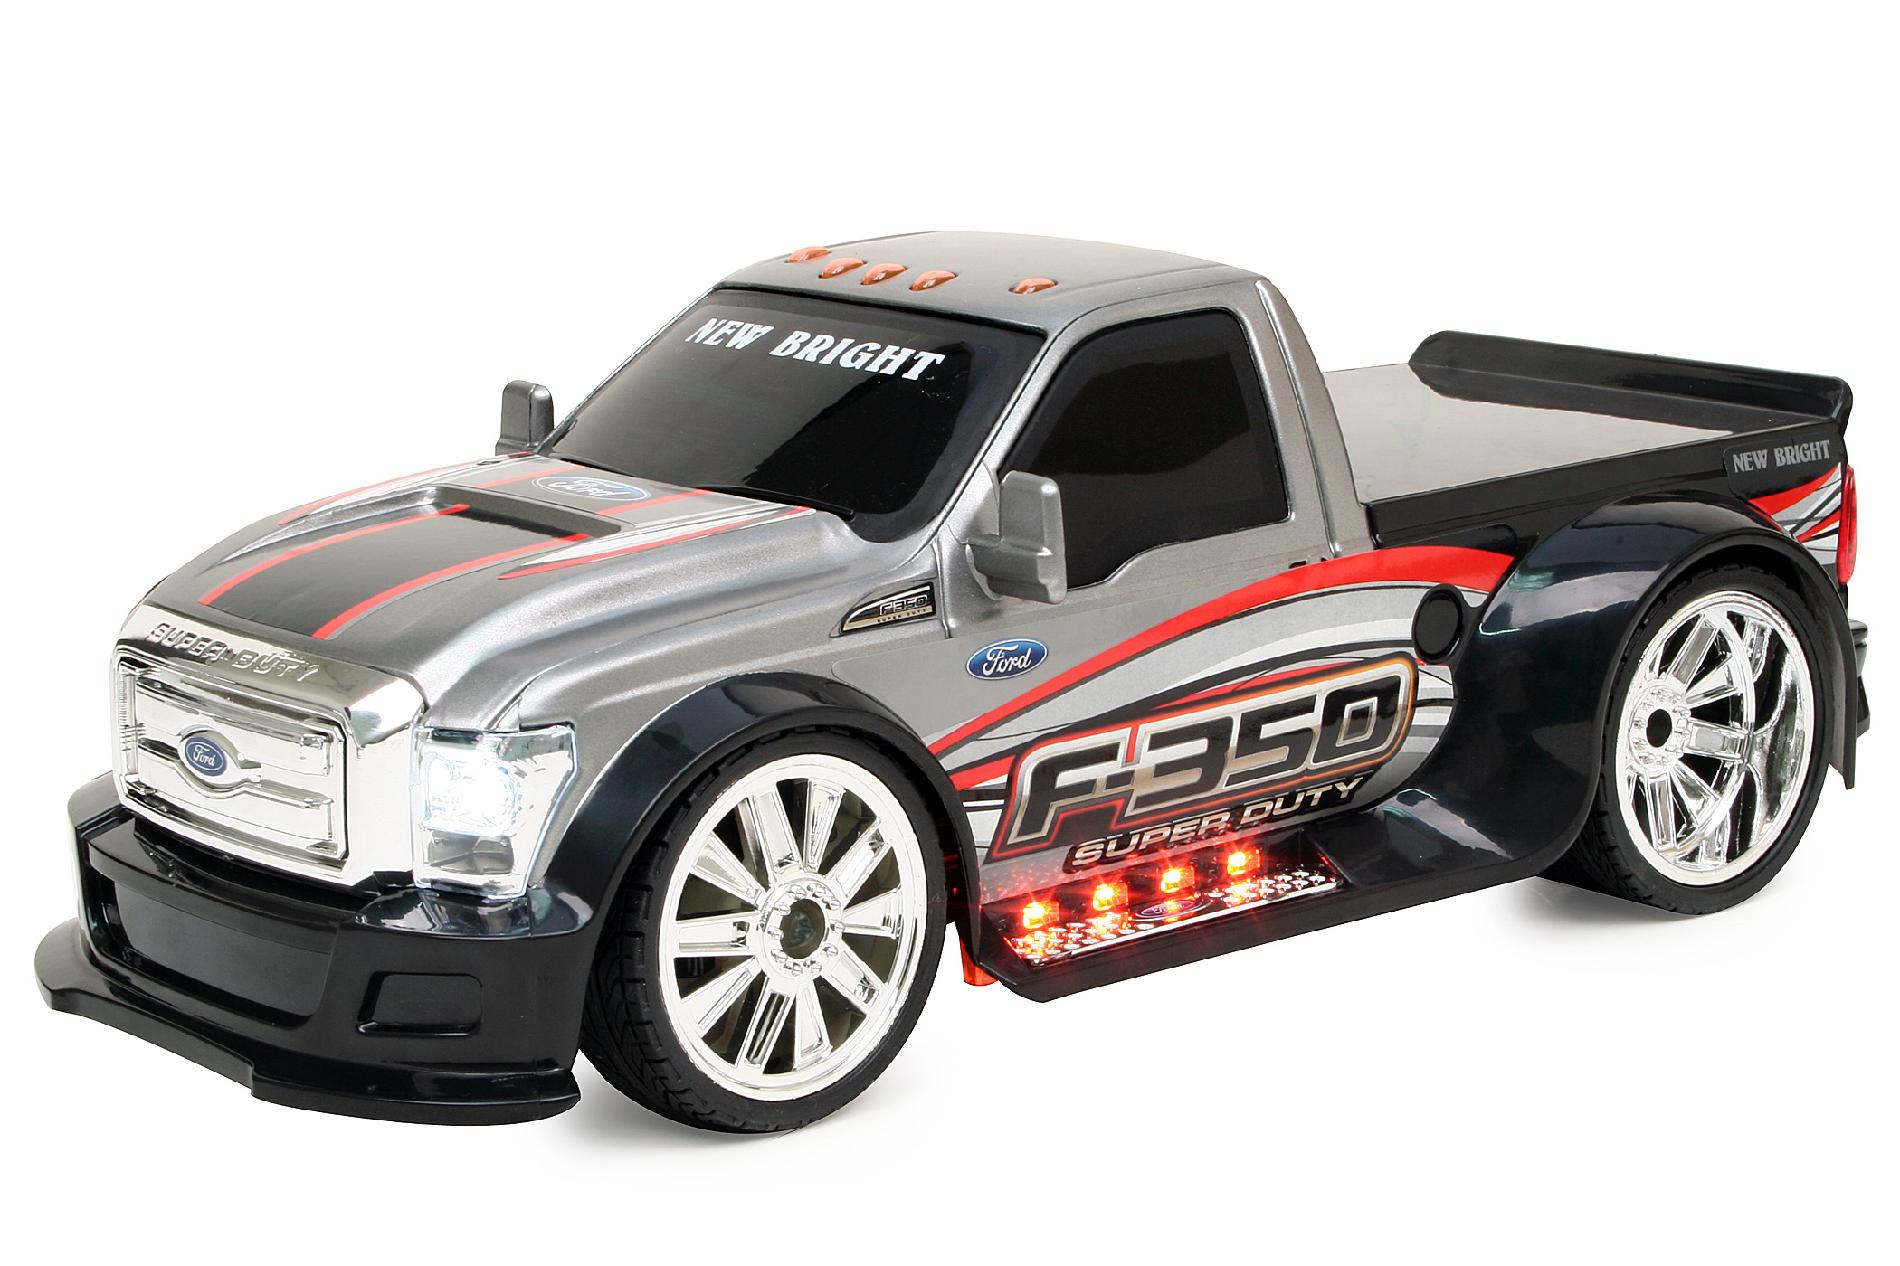 New Bright  116 Scale Ford F 350 Super duty with Lights